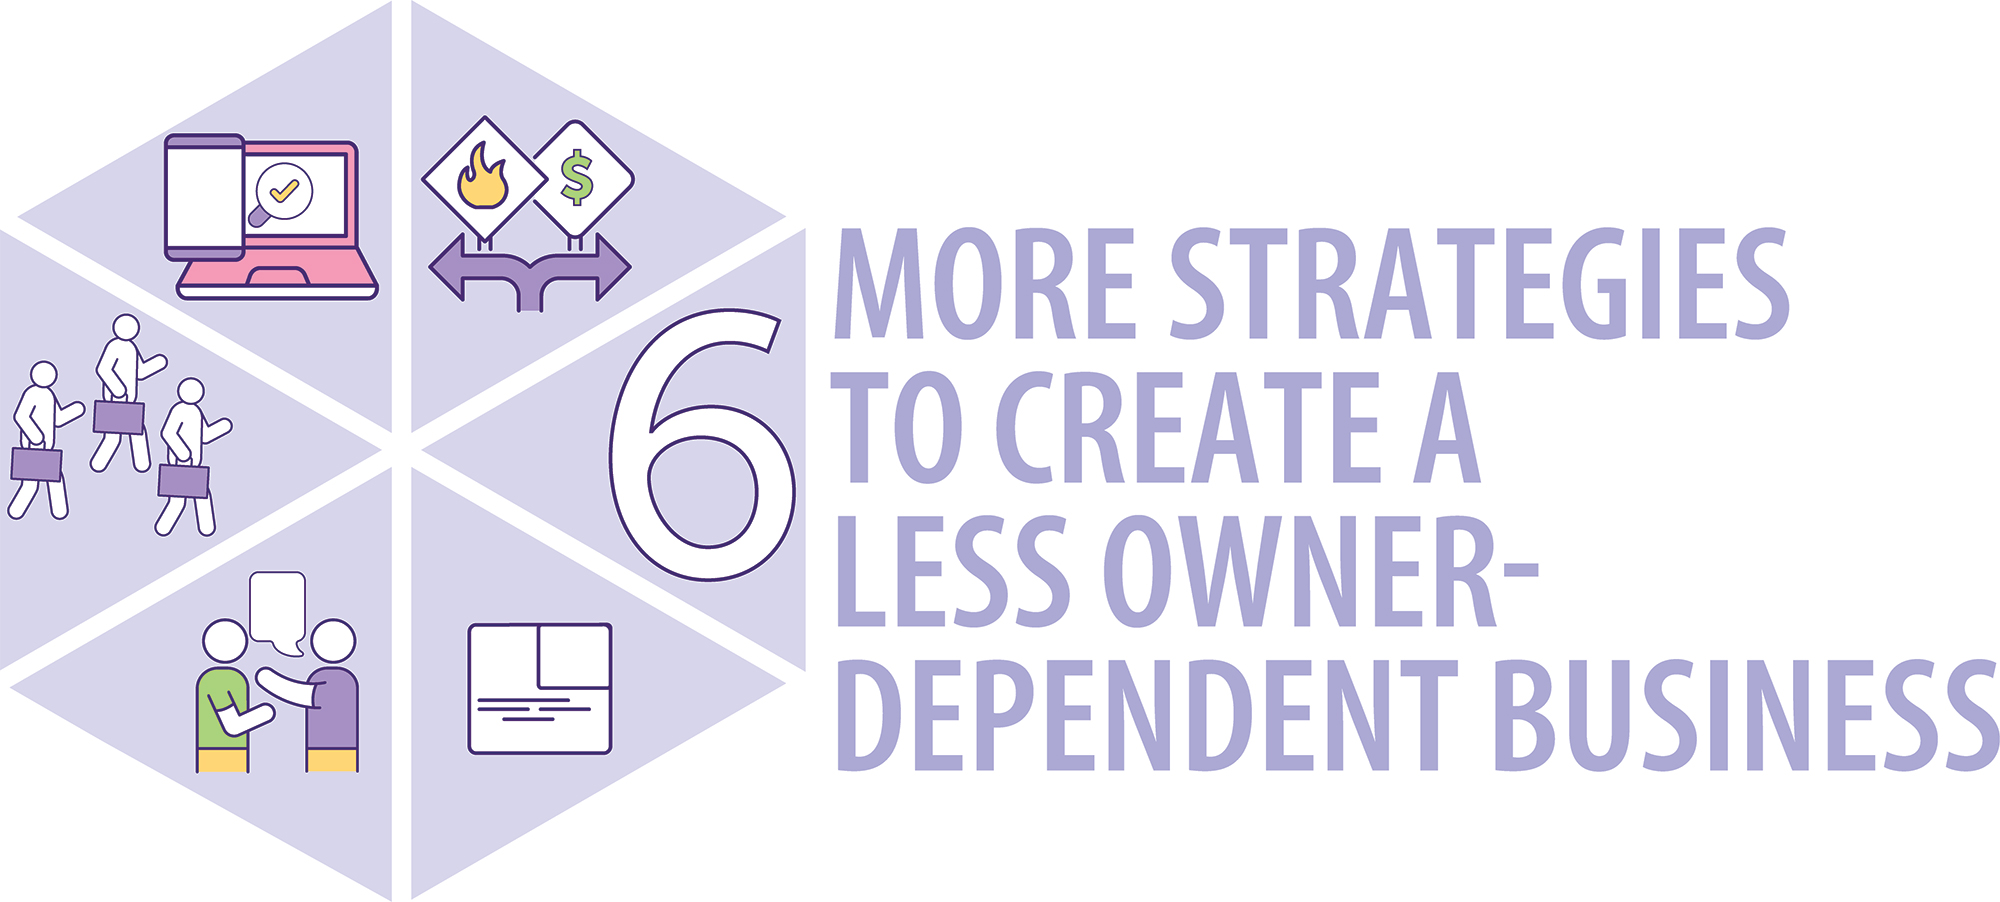 6 More Strategies to Create A Less Owner-Dependent Business